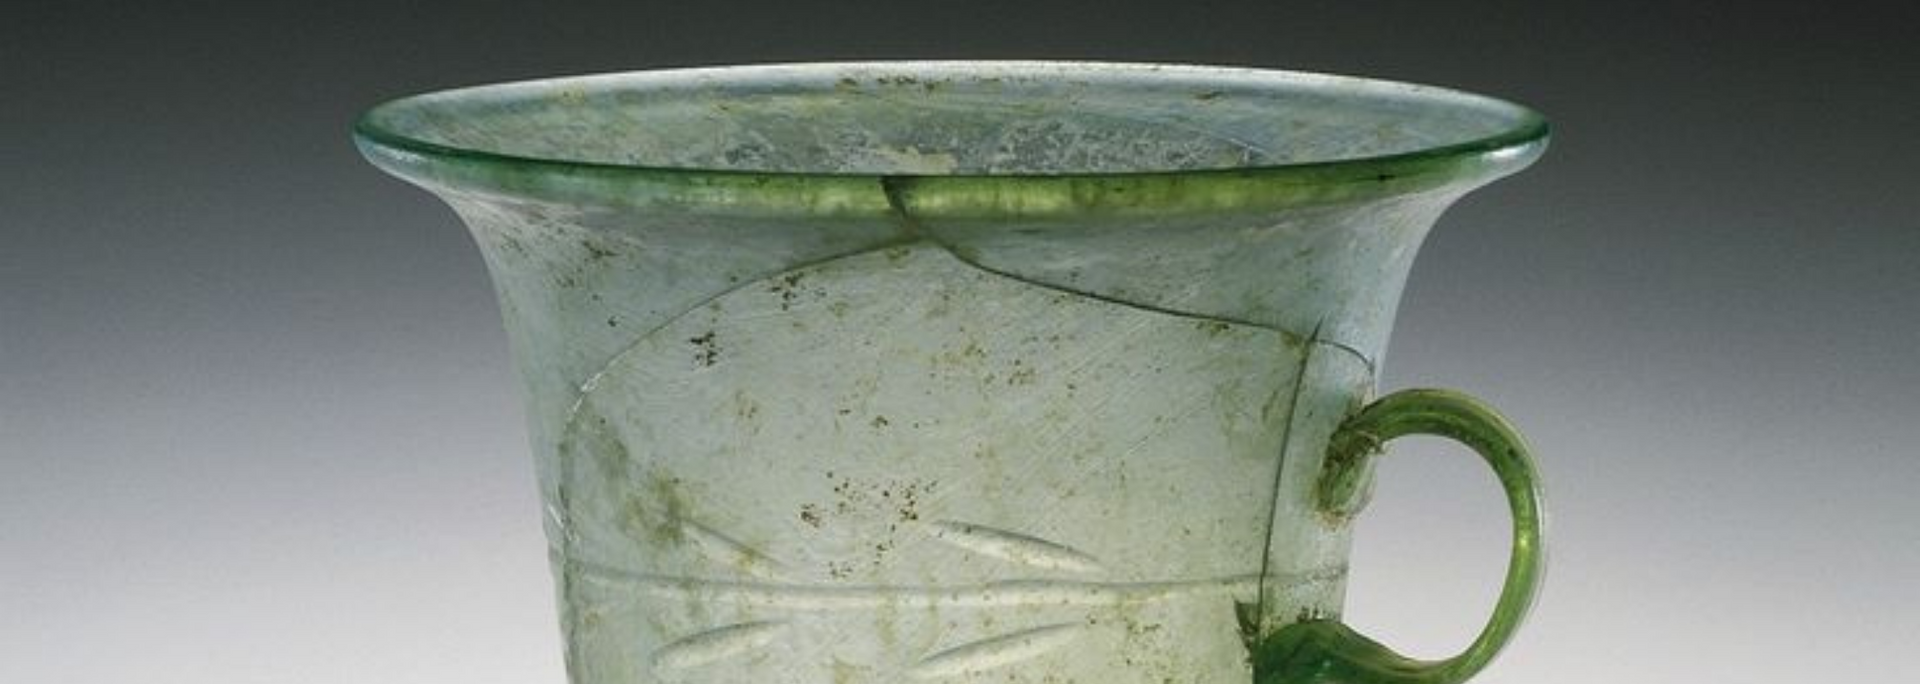 Picture of a Roman glass artefact